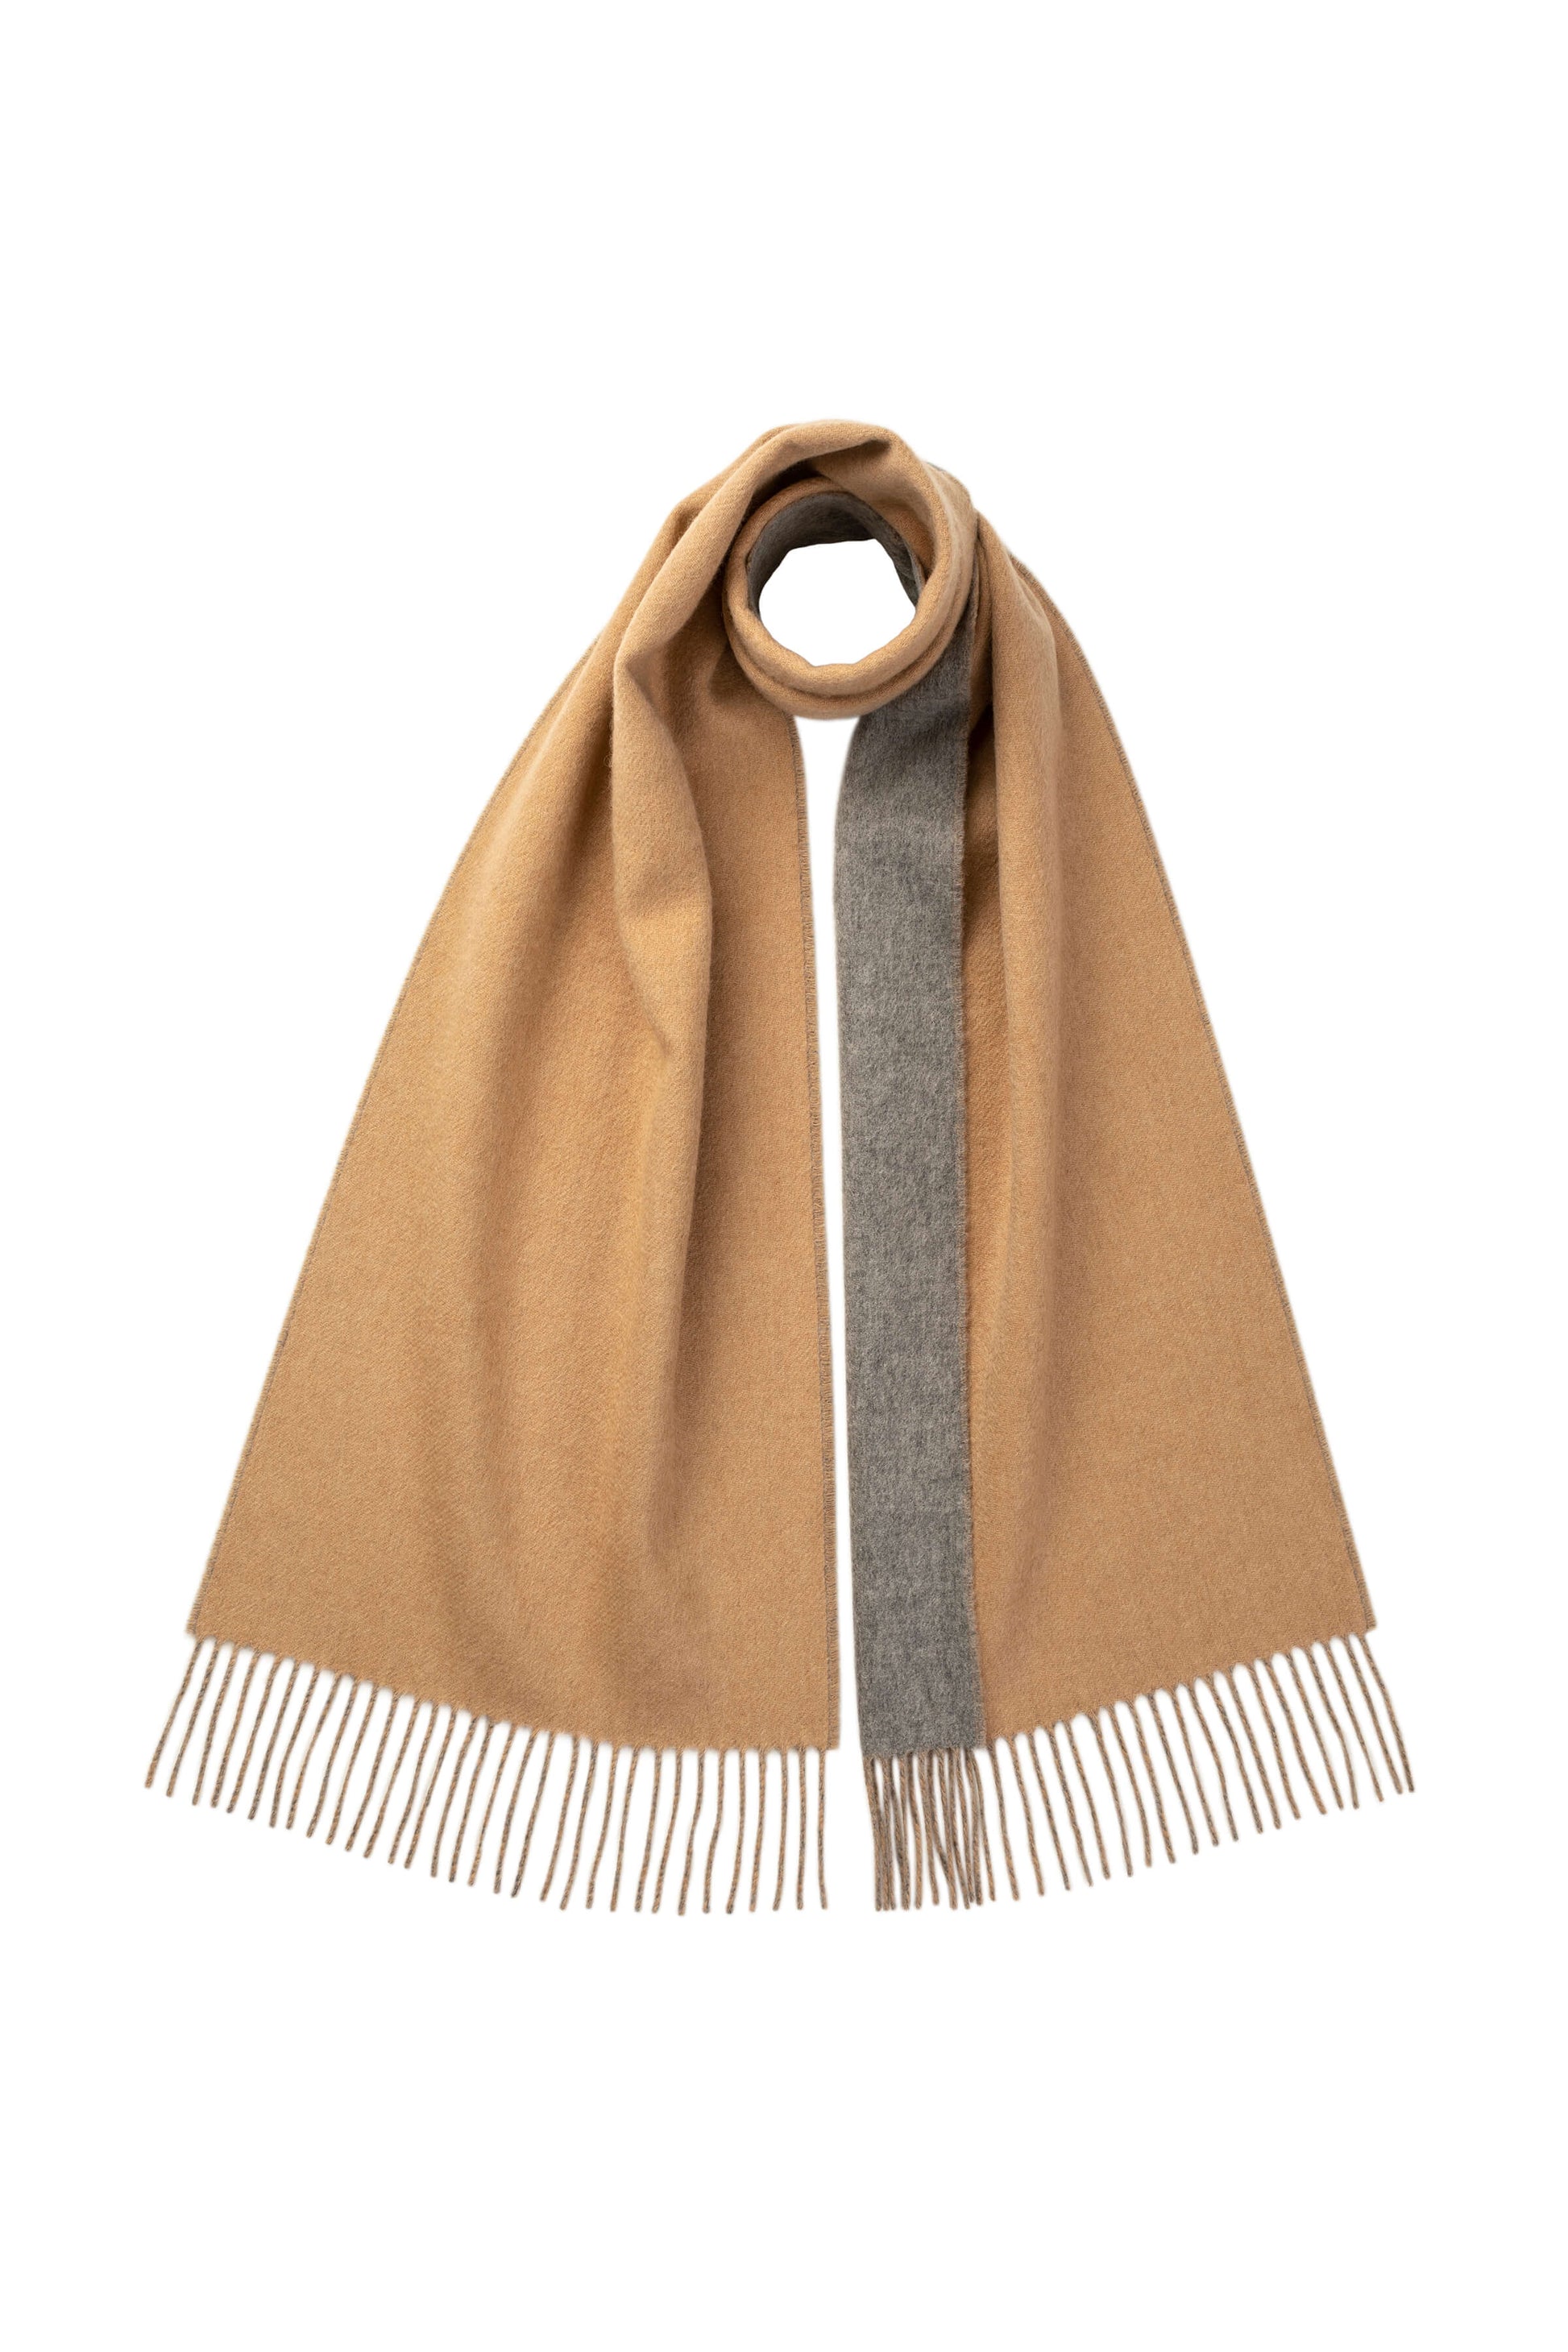 Johnstons of Elgin AW24 Woven Accessory Camel & Light Grey Contrast Reversible Cashmere Scarf WA000020RU7344ONE